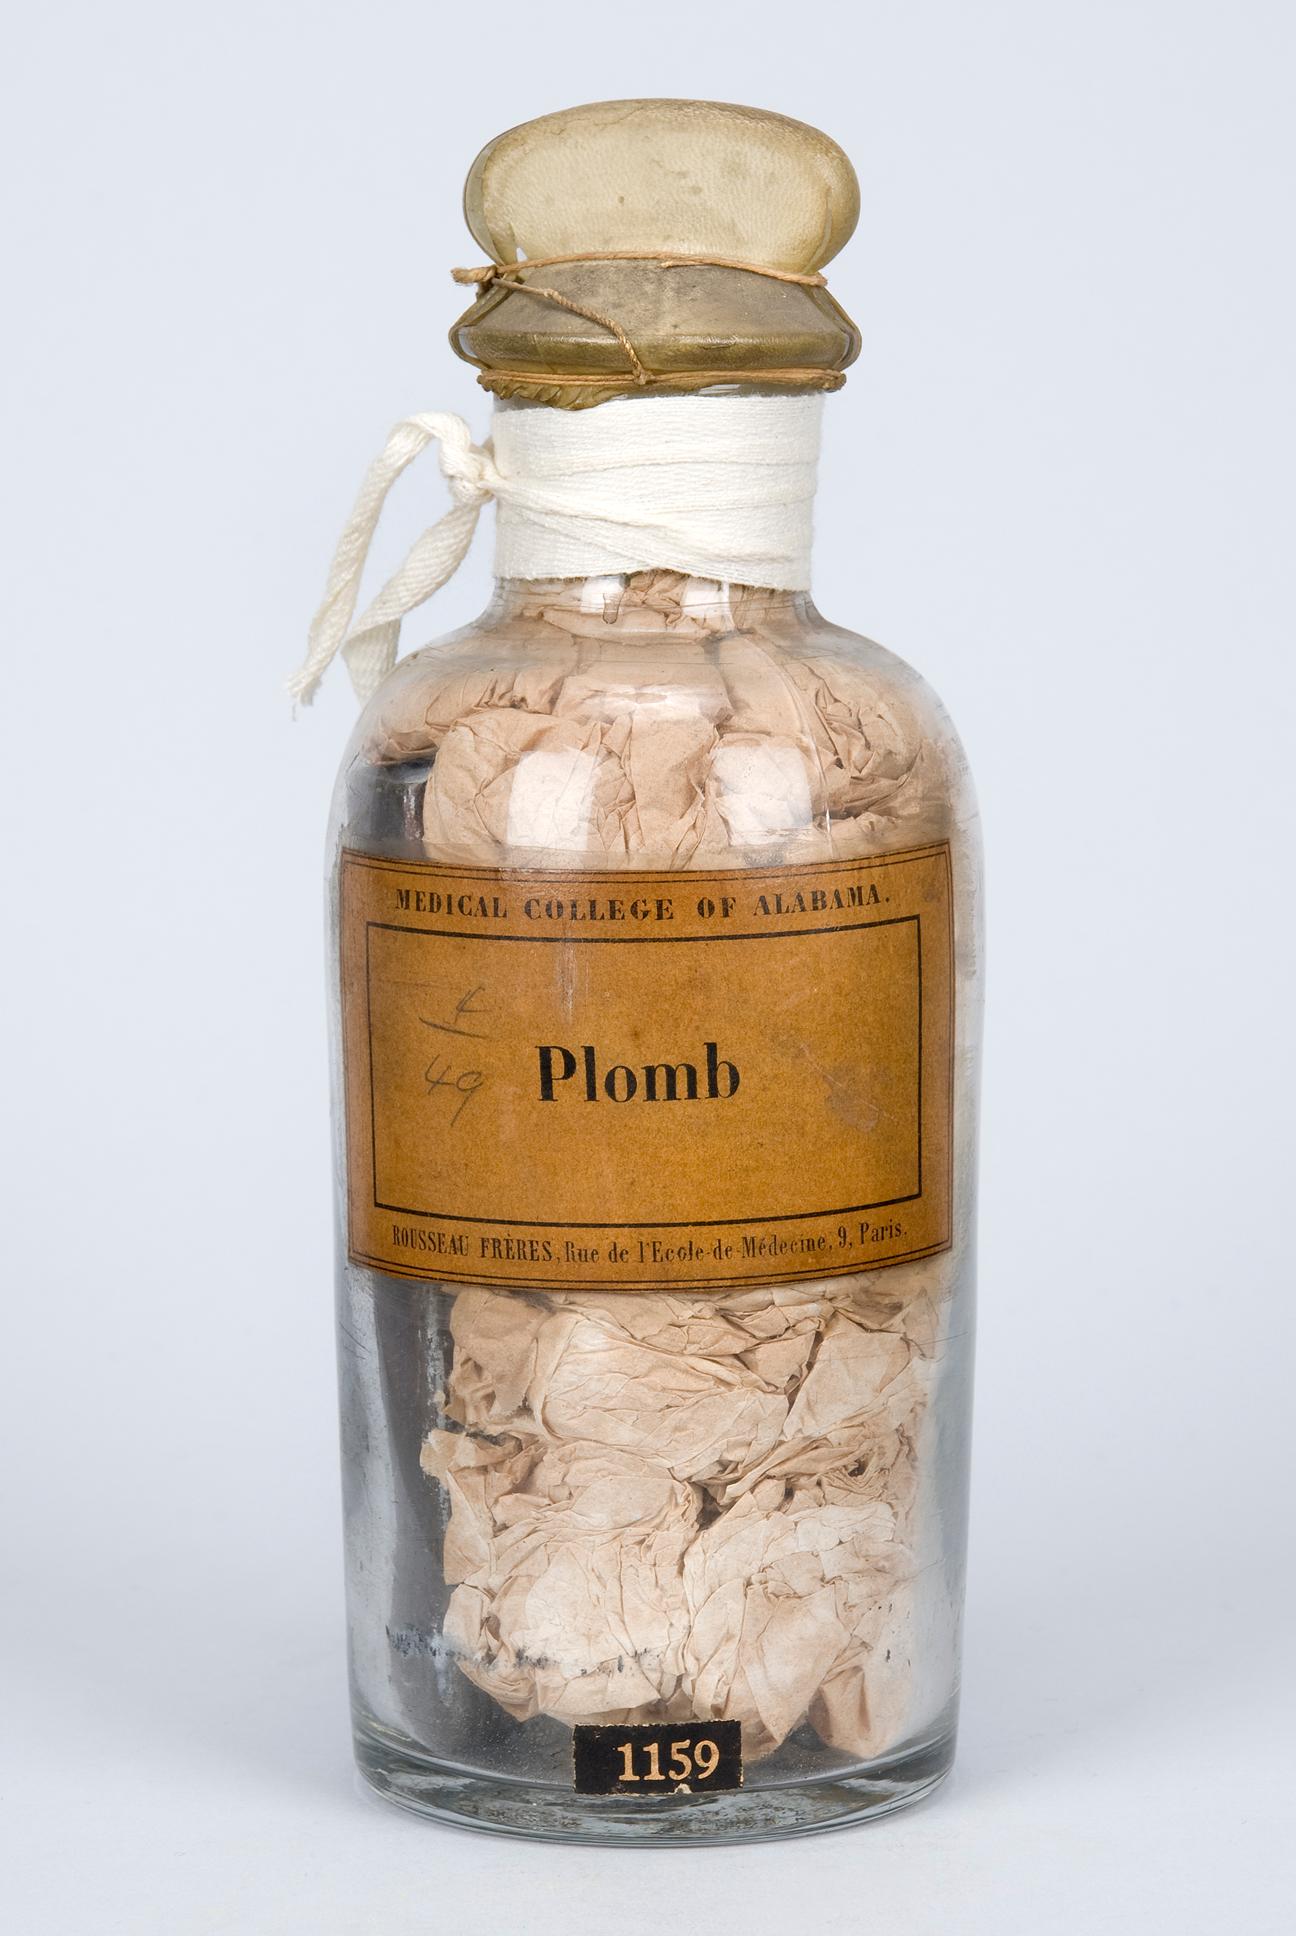 stoppered glass bottle of Plomb, Objects